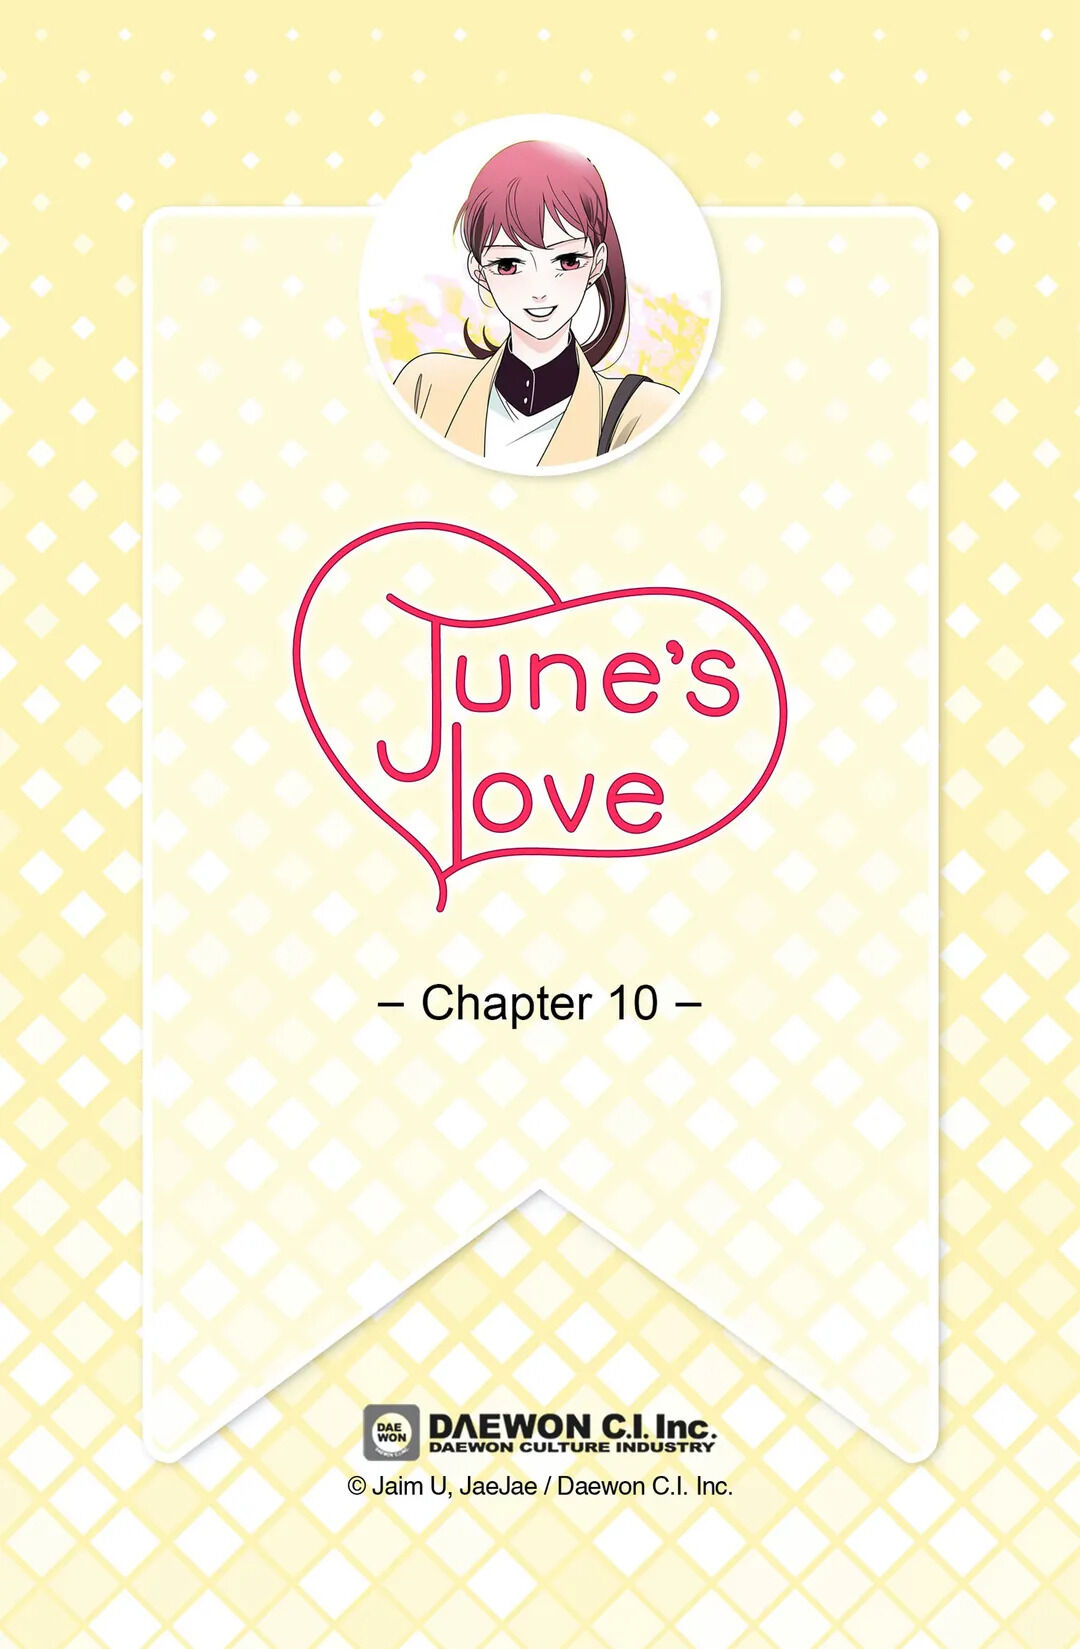 June’S Love - Page 2